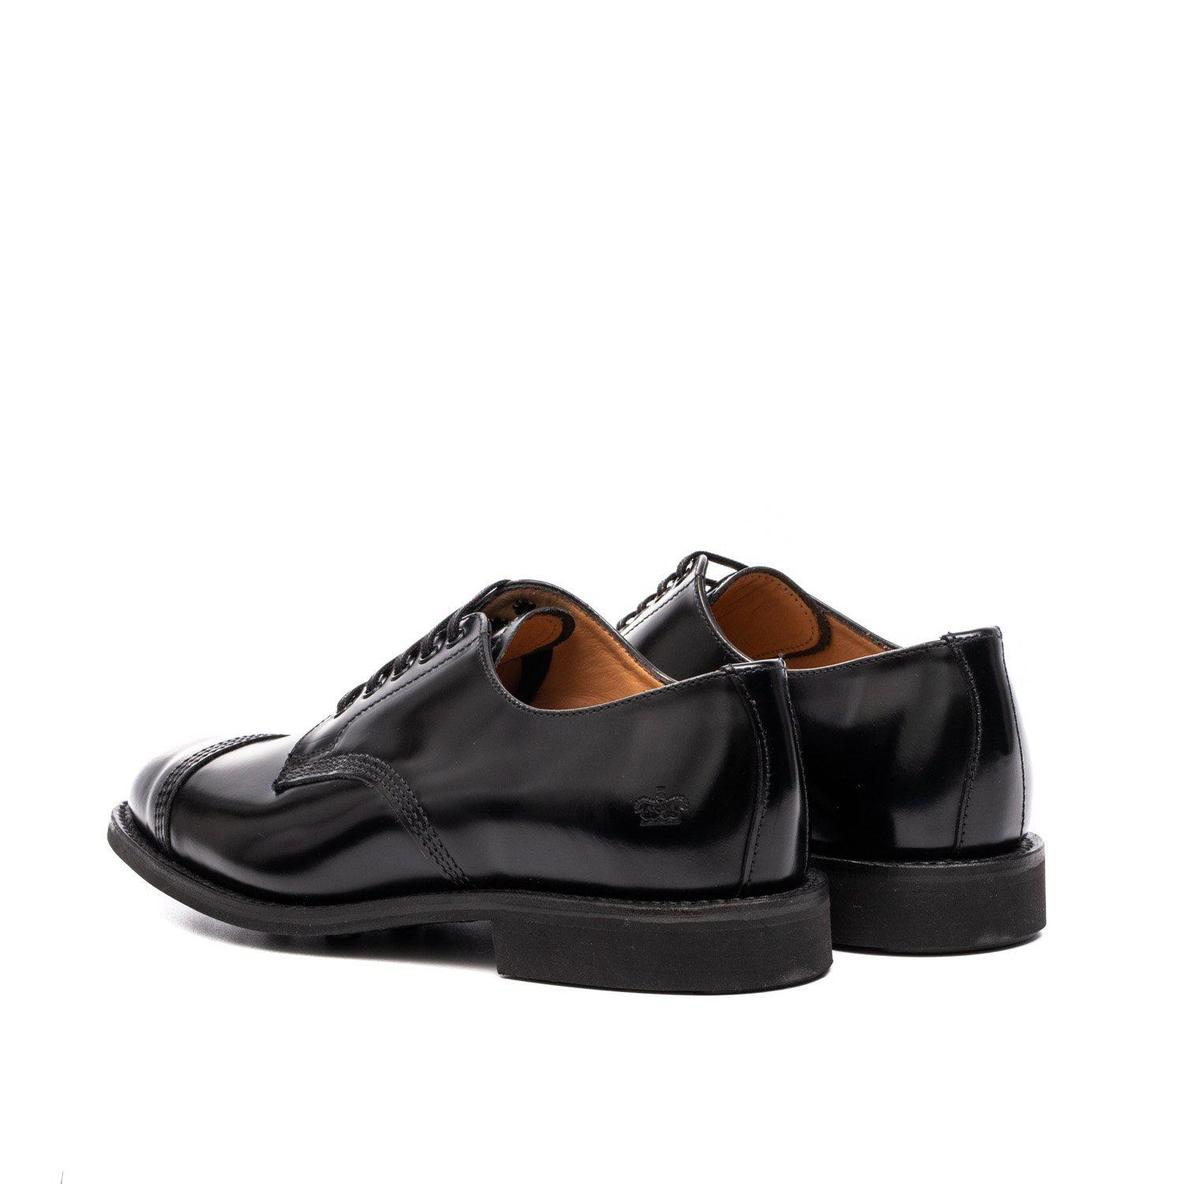 1128B Military Derby Shoe - Black Leather